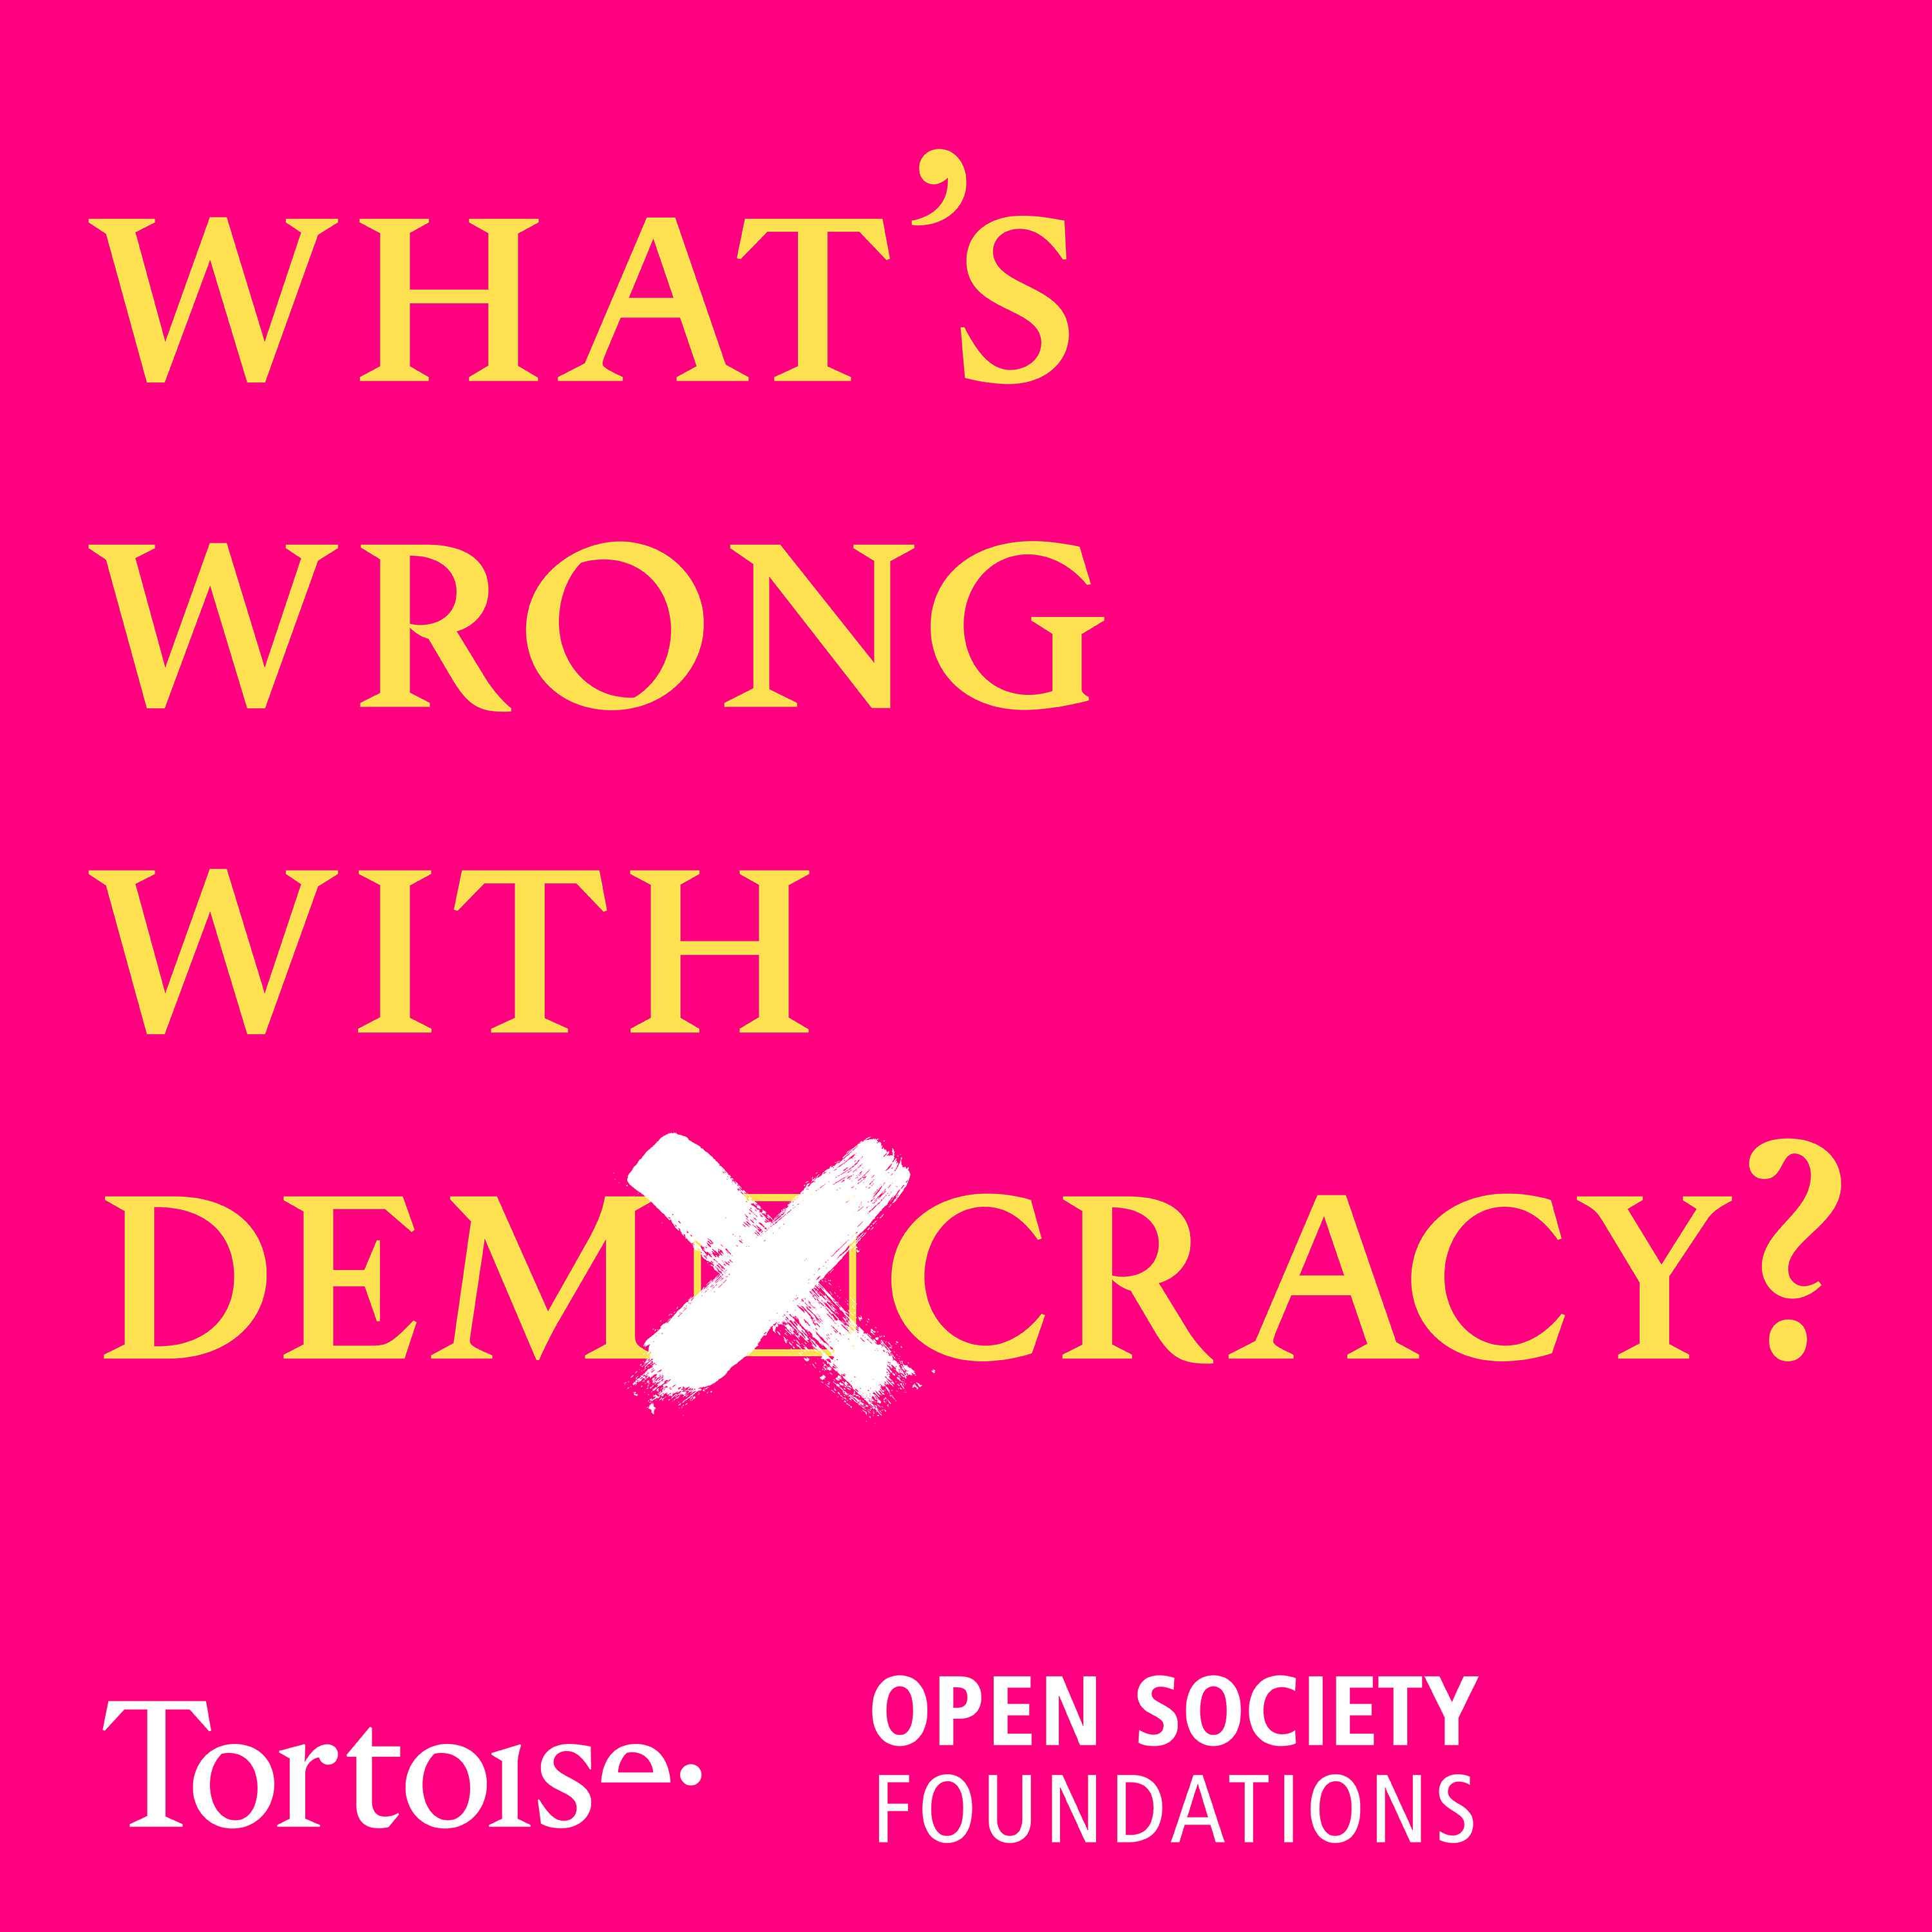 Introducing... What's wrong with democracy?